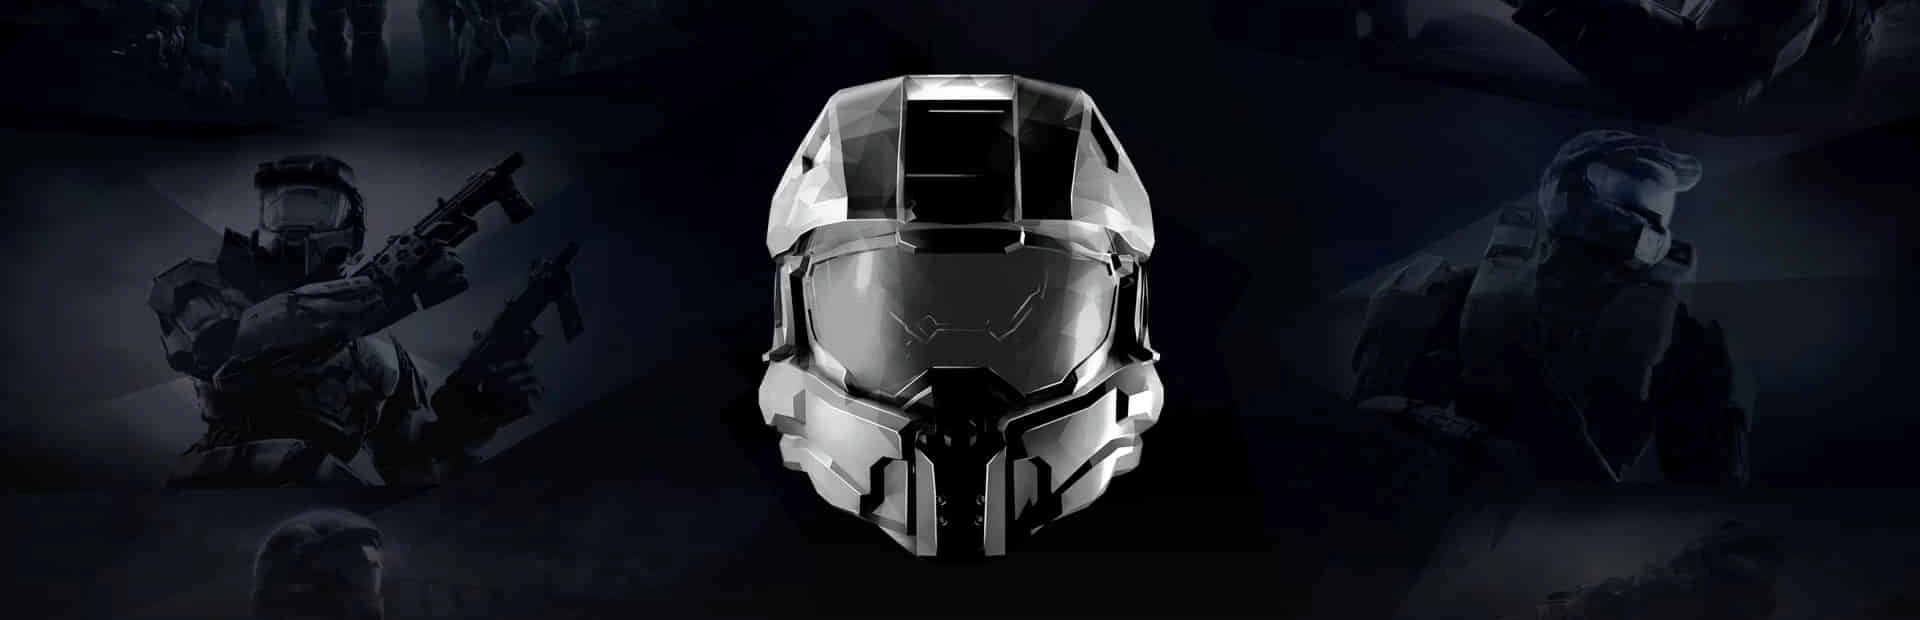 Halo 4 The Master Chief Collection.banner1